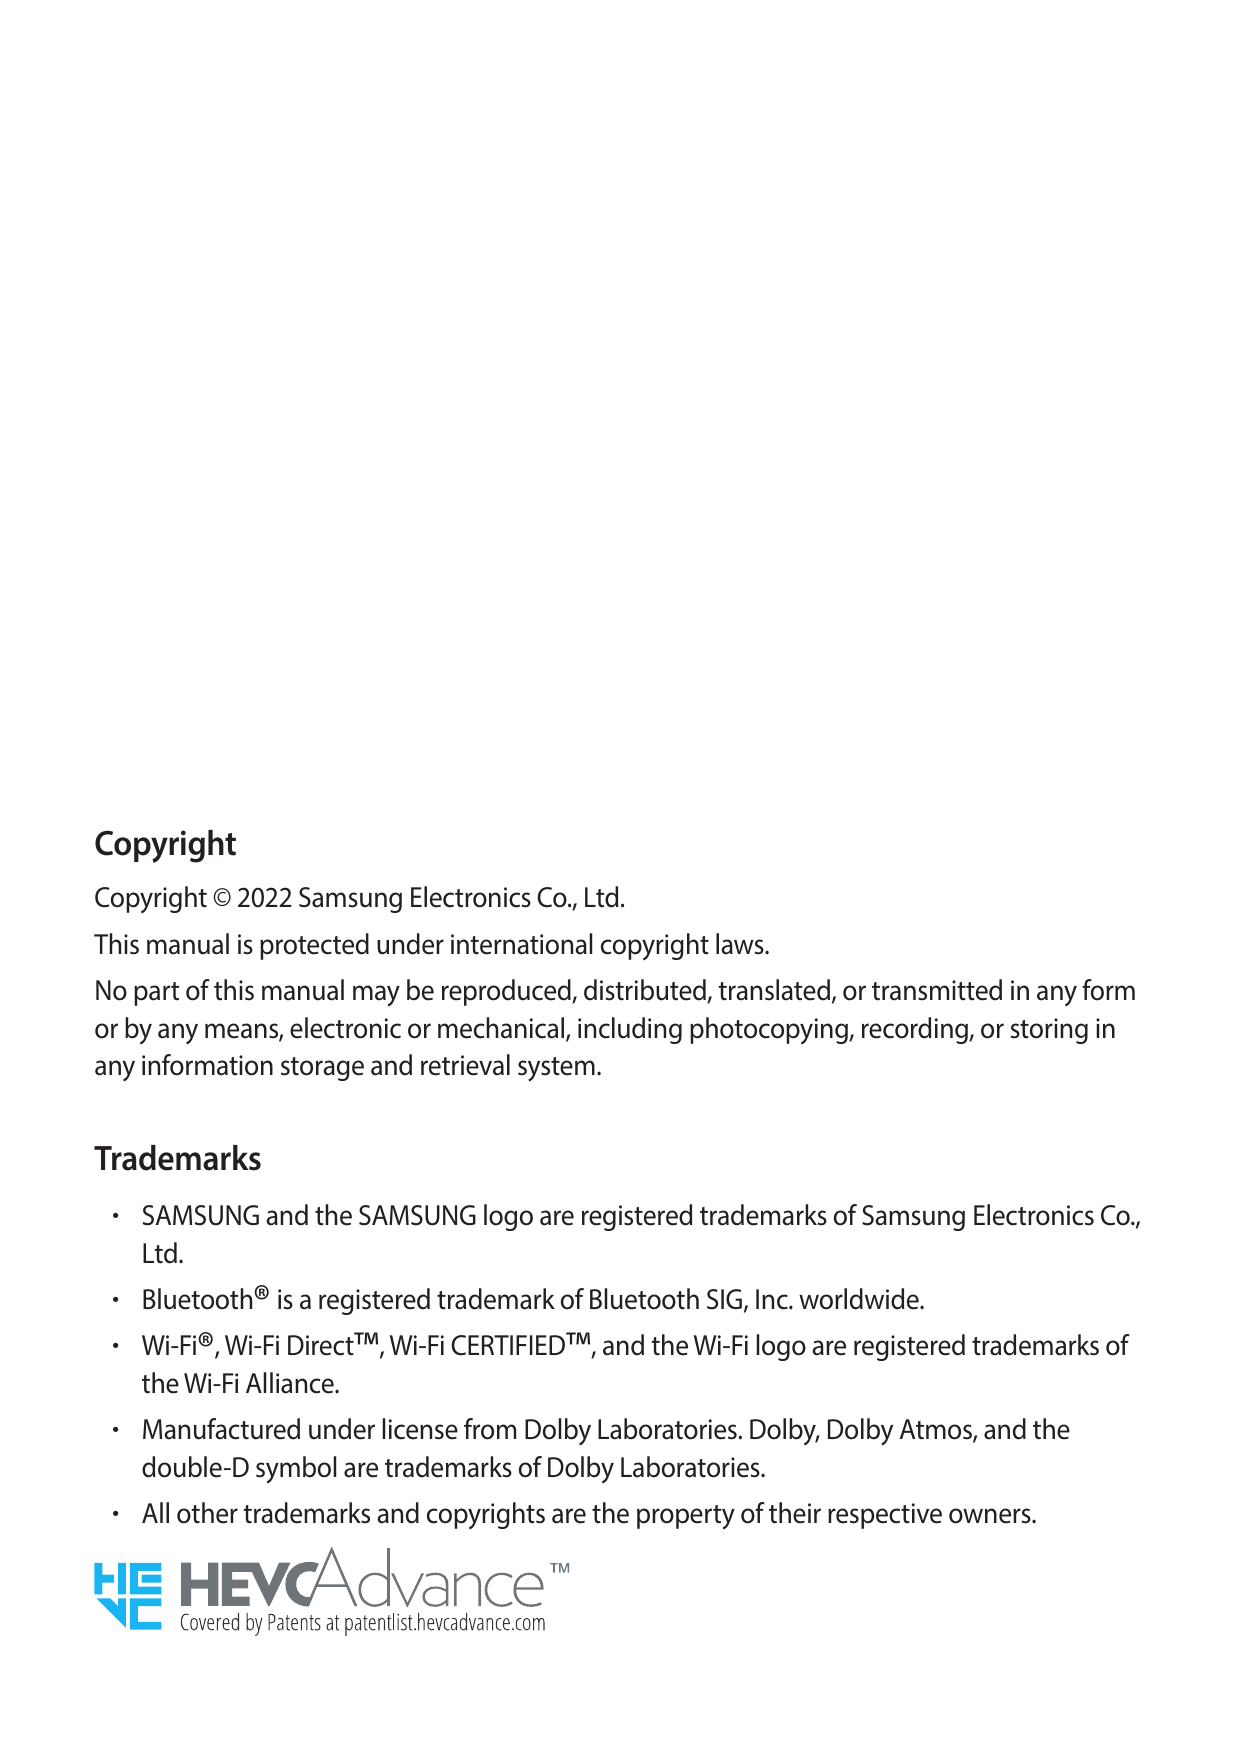 CopyrightCopyright © 2022 Samsung Electronics Co., Ltd.This manual is protected under international copyright laws.No part of th